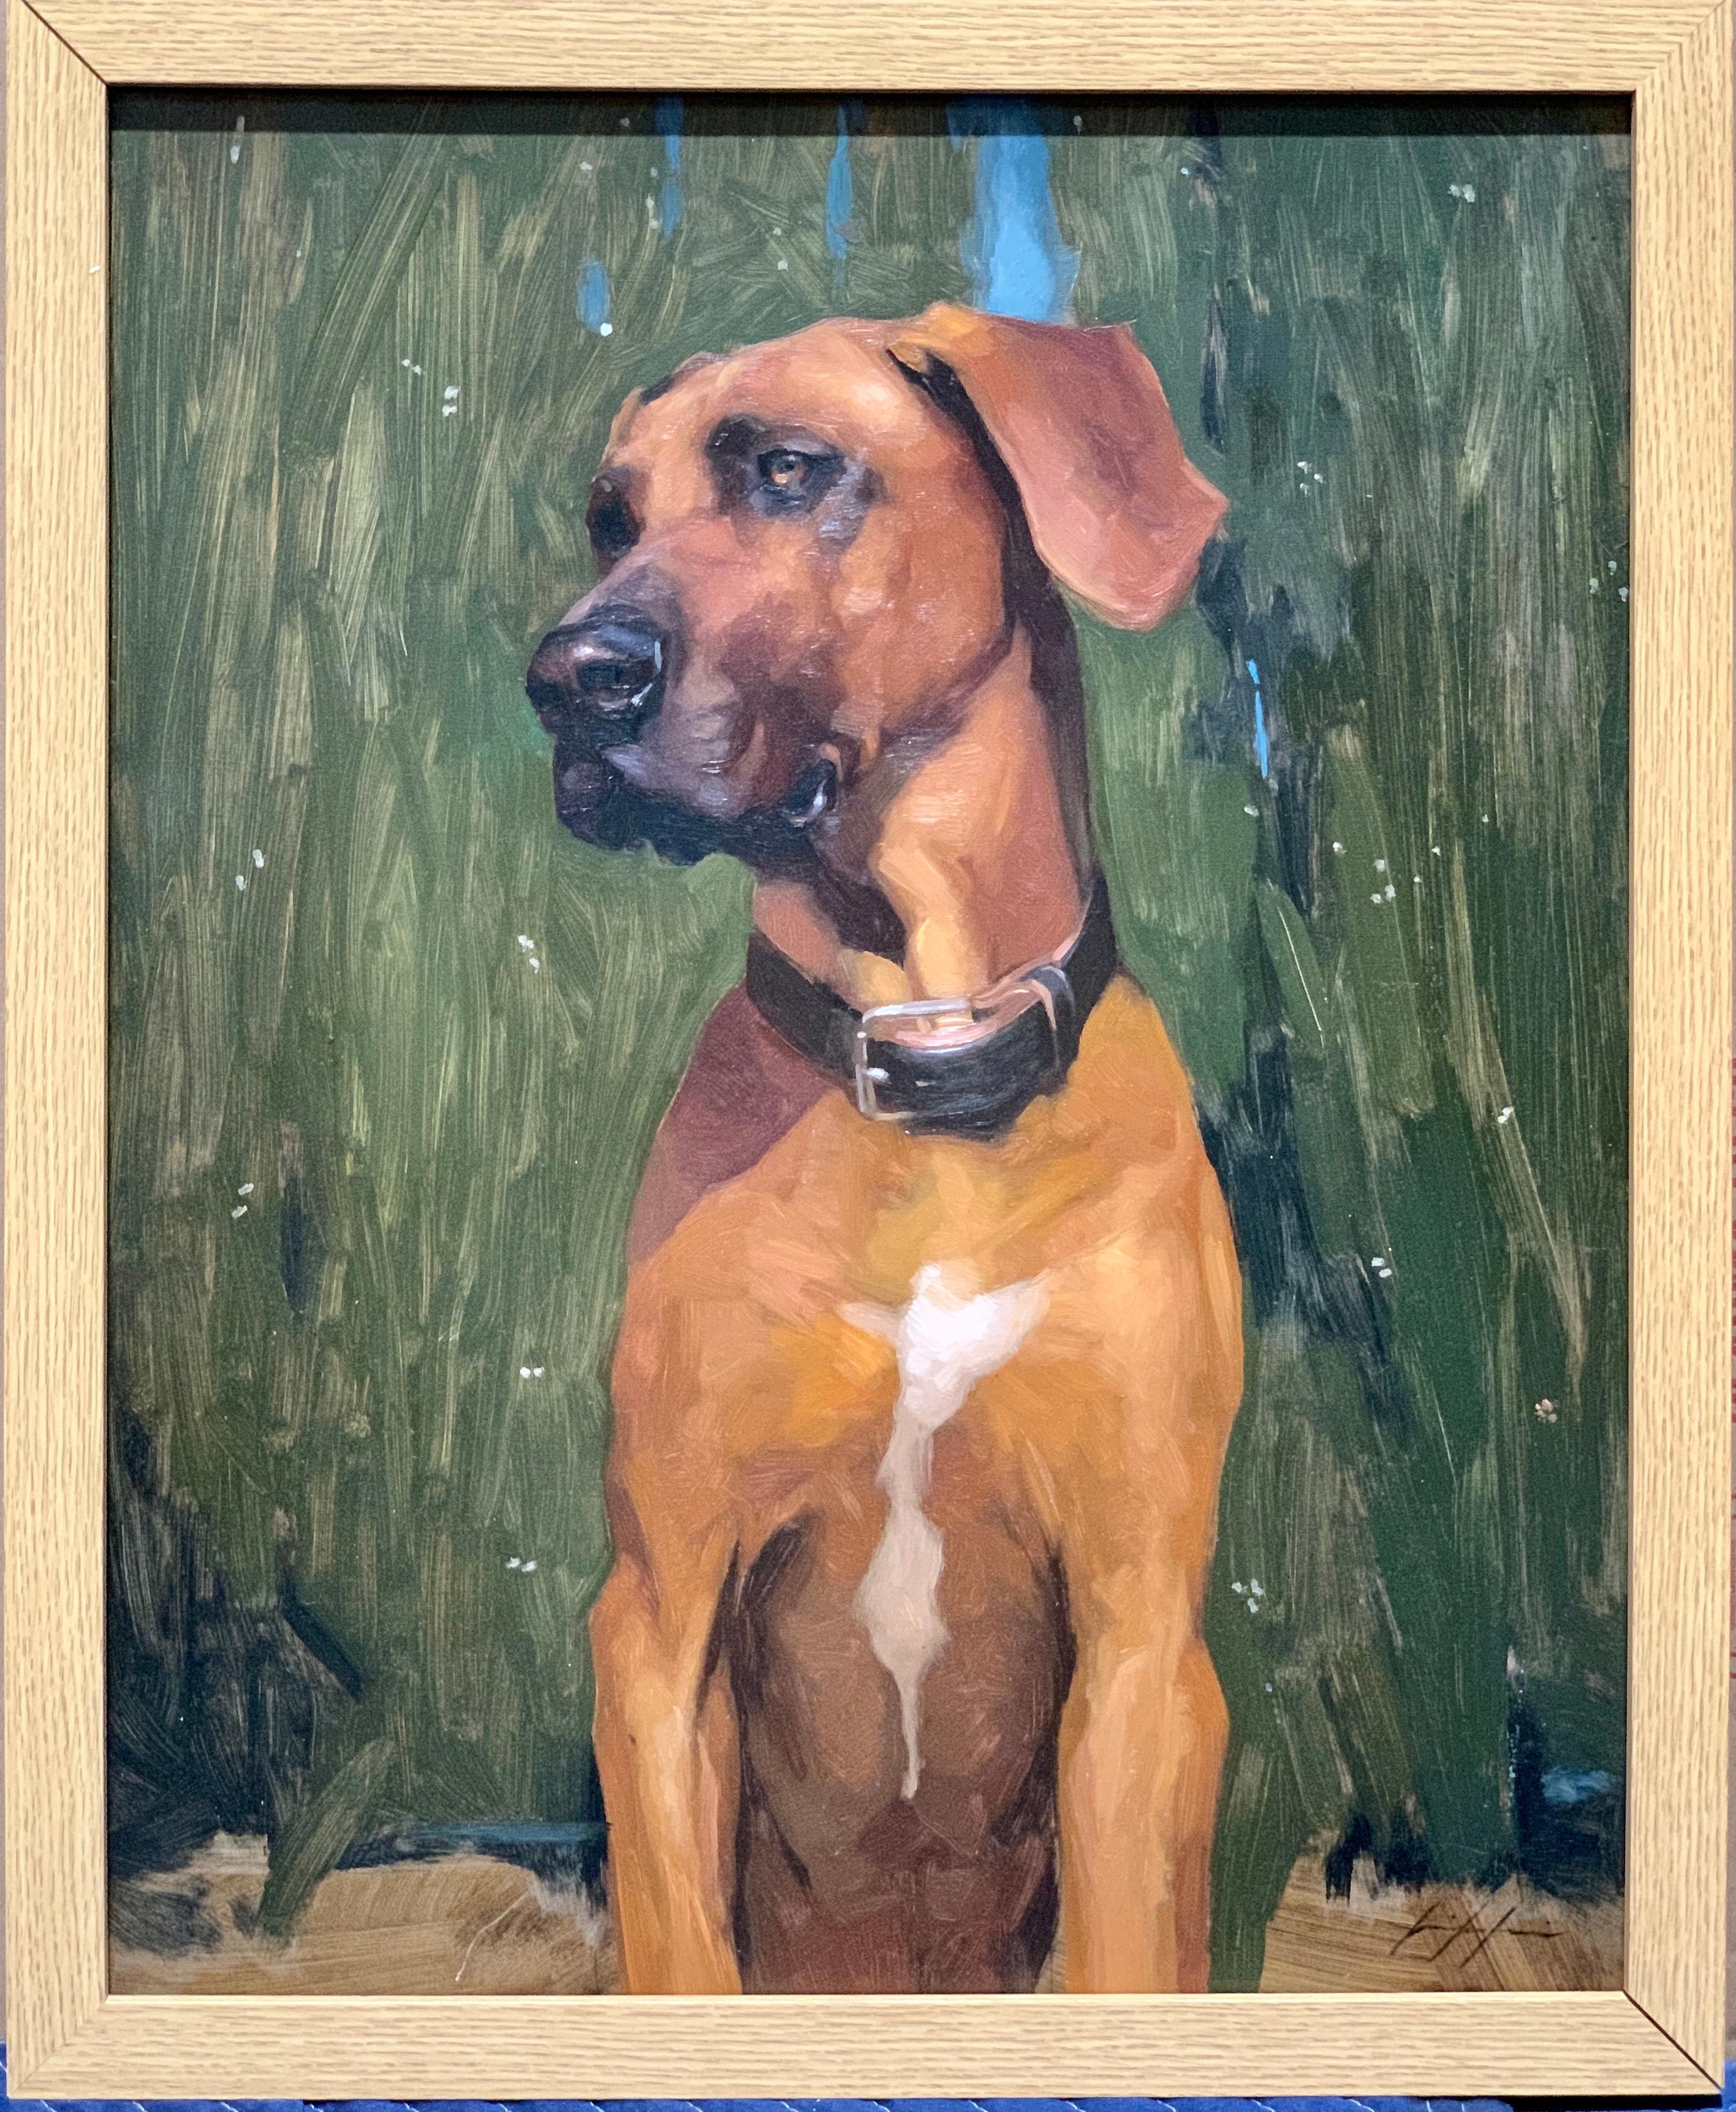 Stunning 21st century American realist portrait of a an American Boxer mix dog